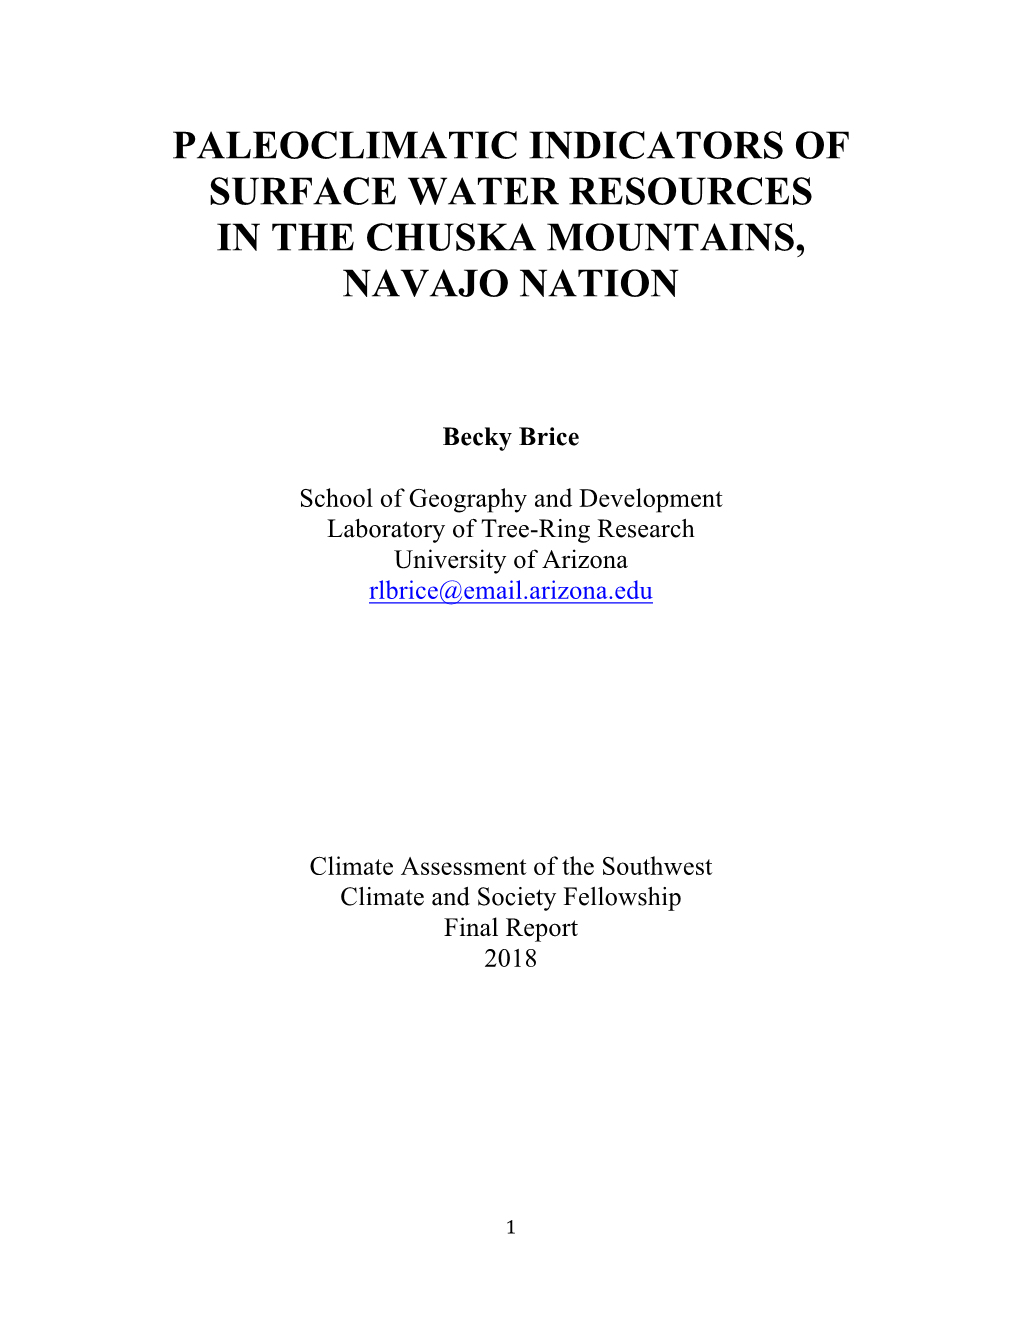 Paleoclimatic Indicators of Surface Water Resources in the Chuska Mountains, Navajo Nation